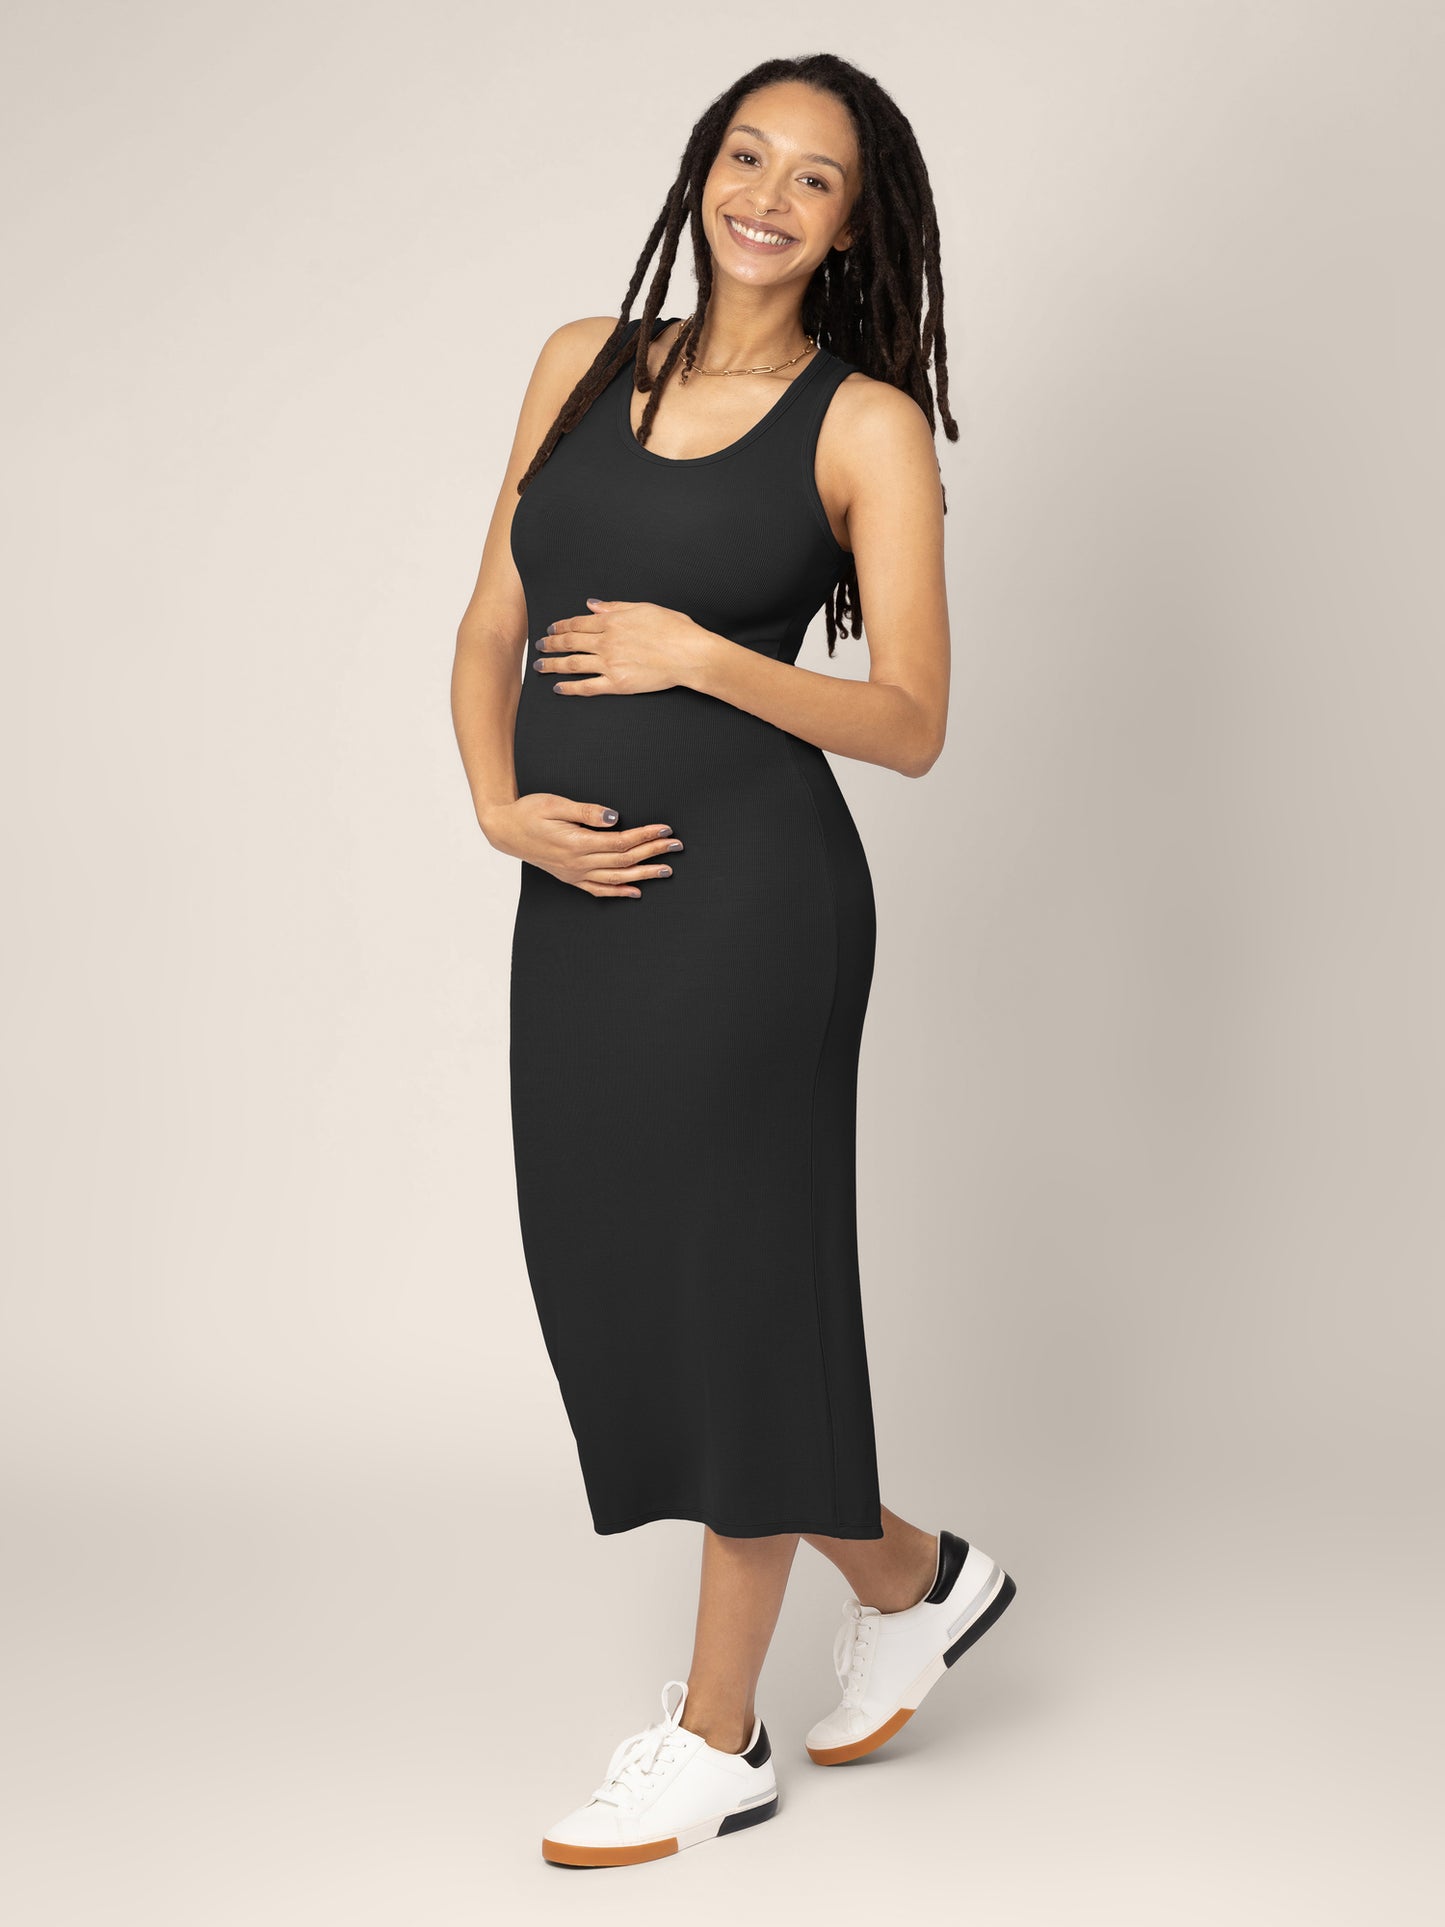 Pregnant model wearing the Olivia Ribbed Bamboo 2-in-1 Maternity & Nursing Dress in Black, showing off the tank top portion of the dress